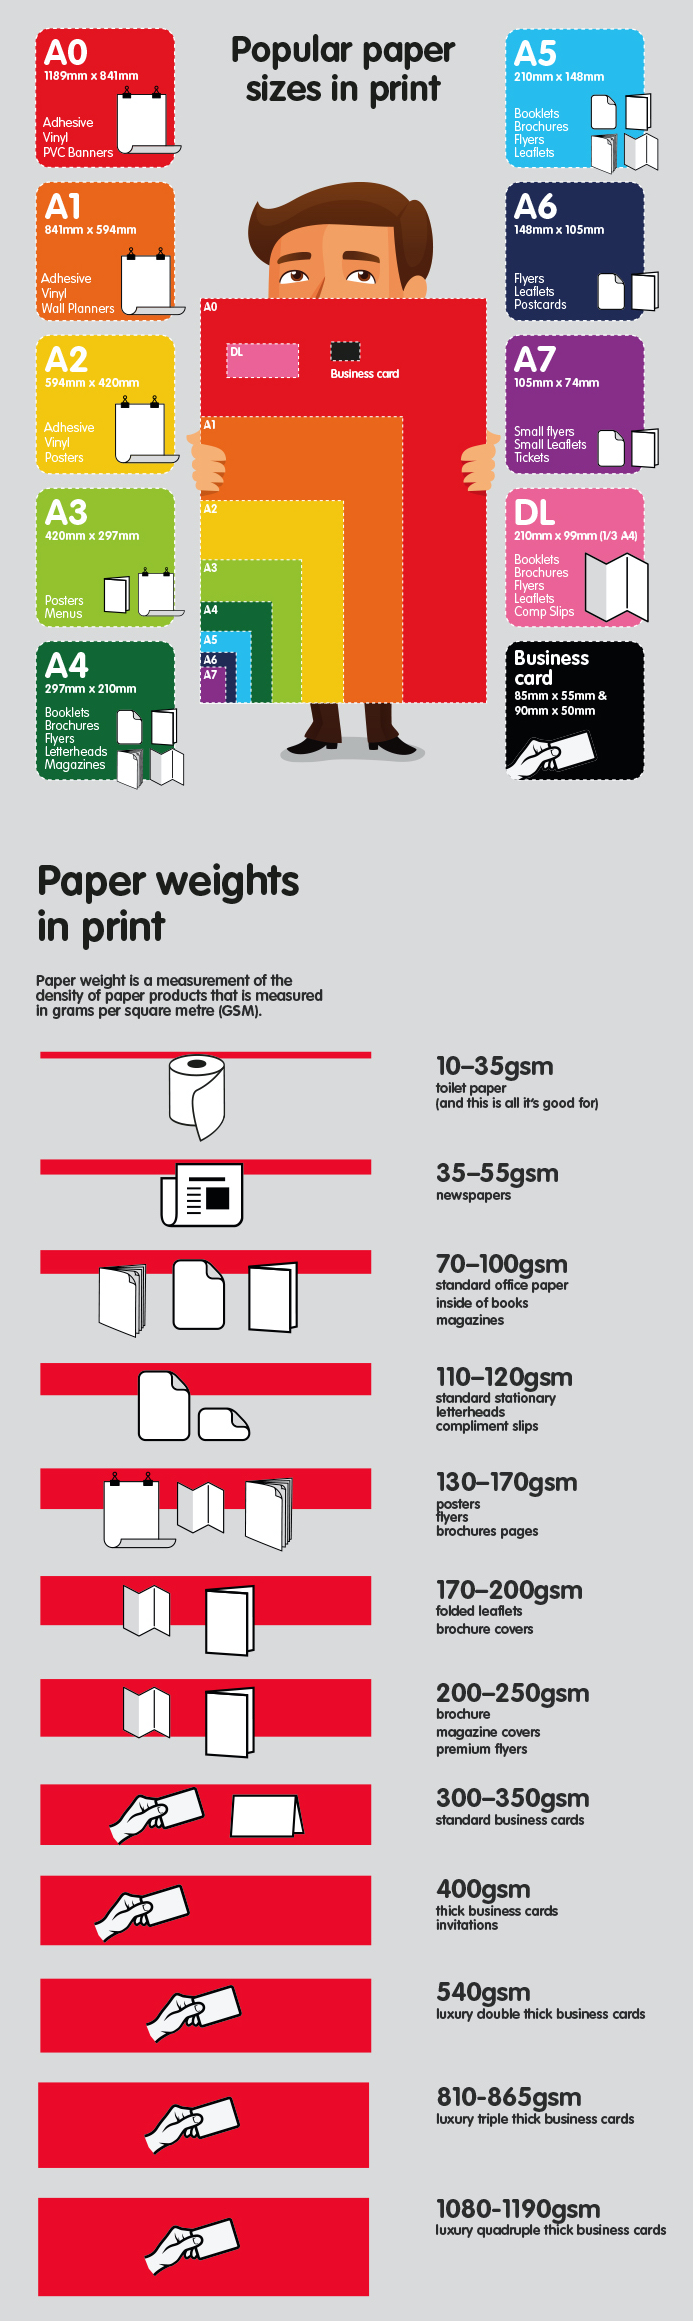 Printer Paper Weight Guide: How to Choose